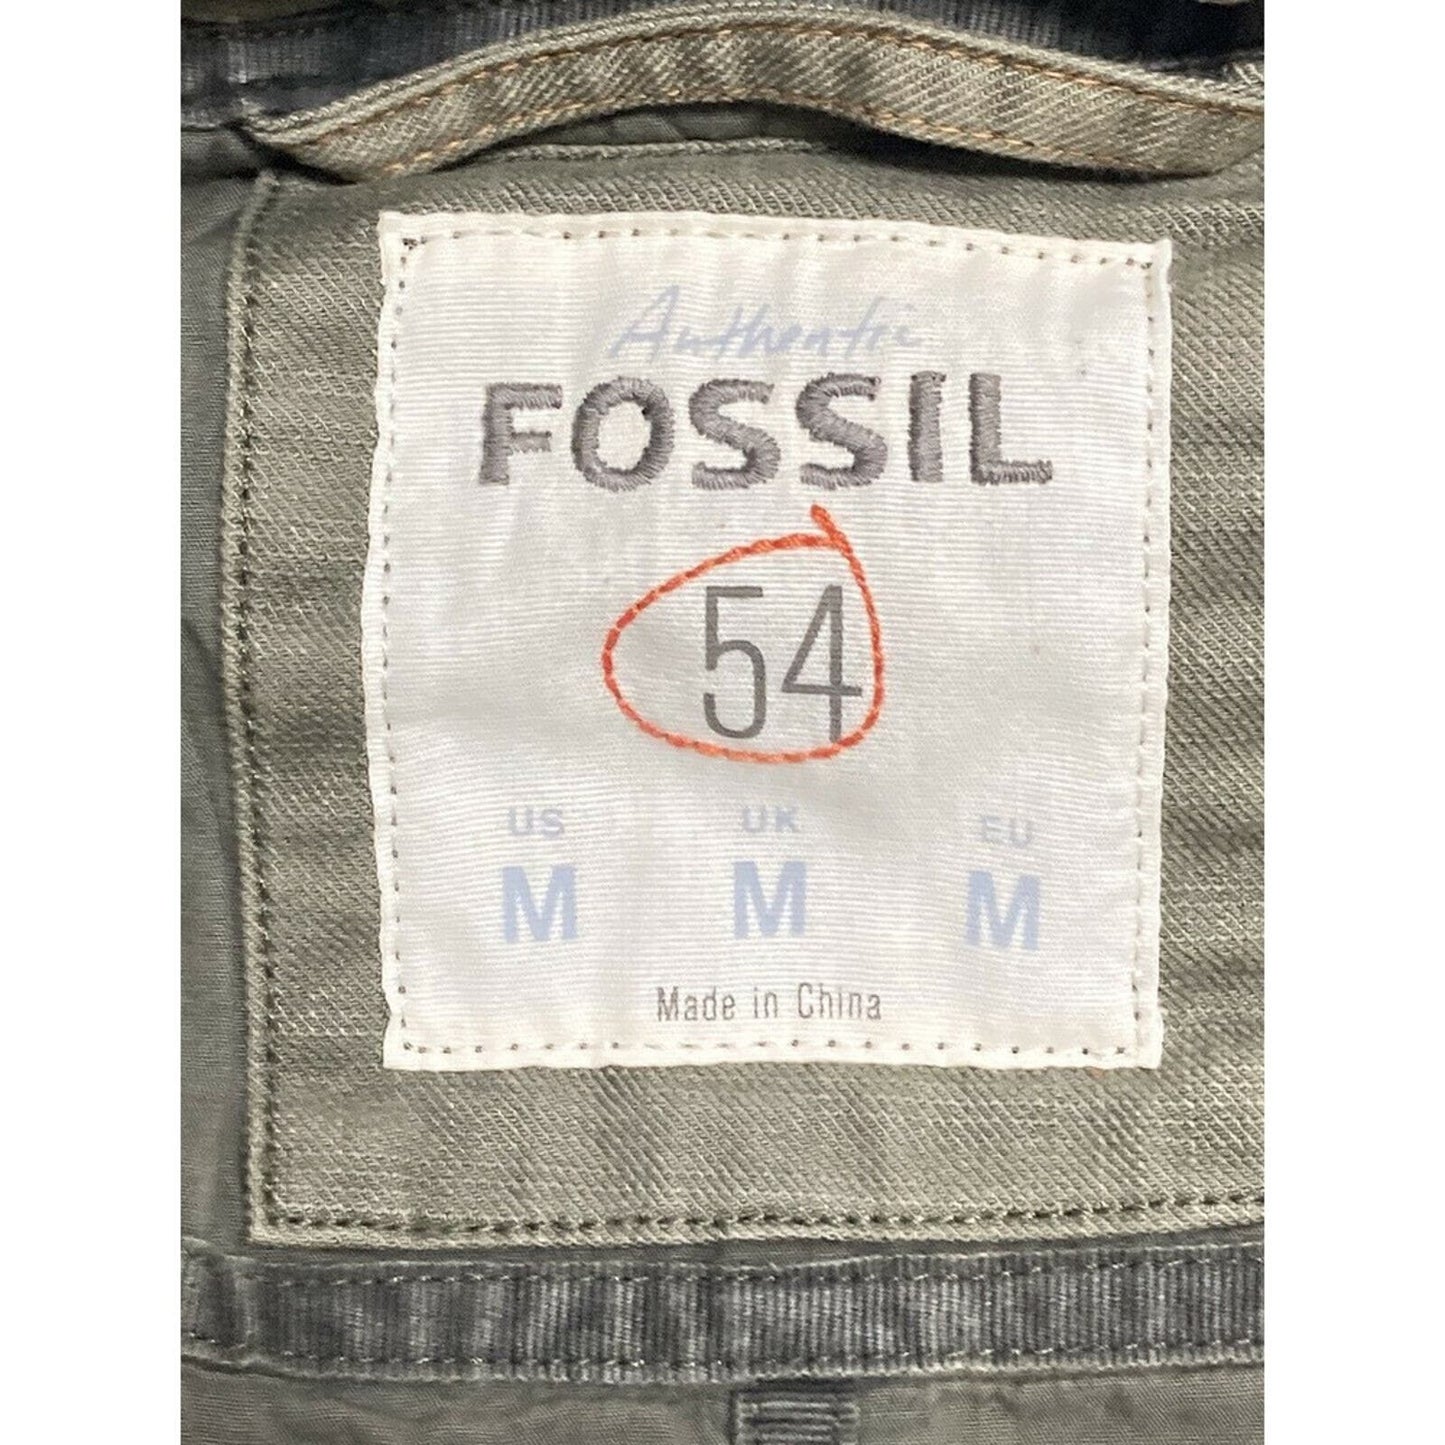 Fossil 54 Army Green Utility Hooded Jacket Size M Medium Pockets Snaps